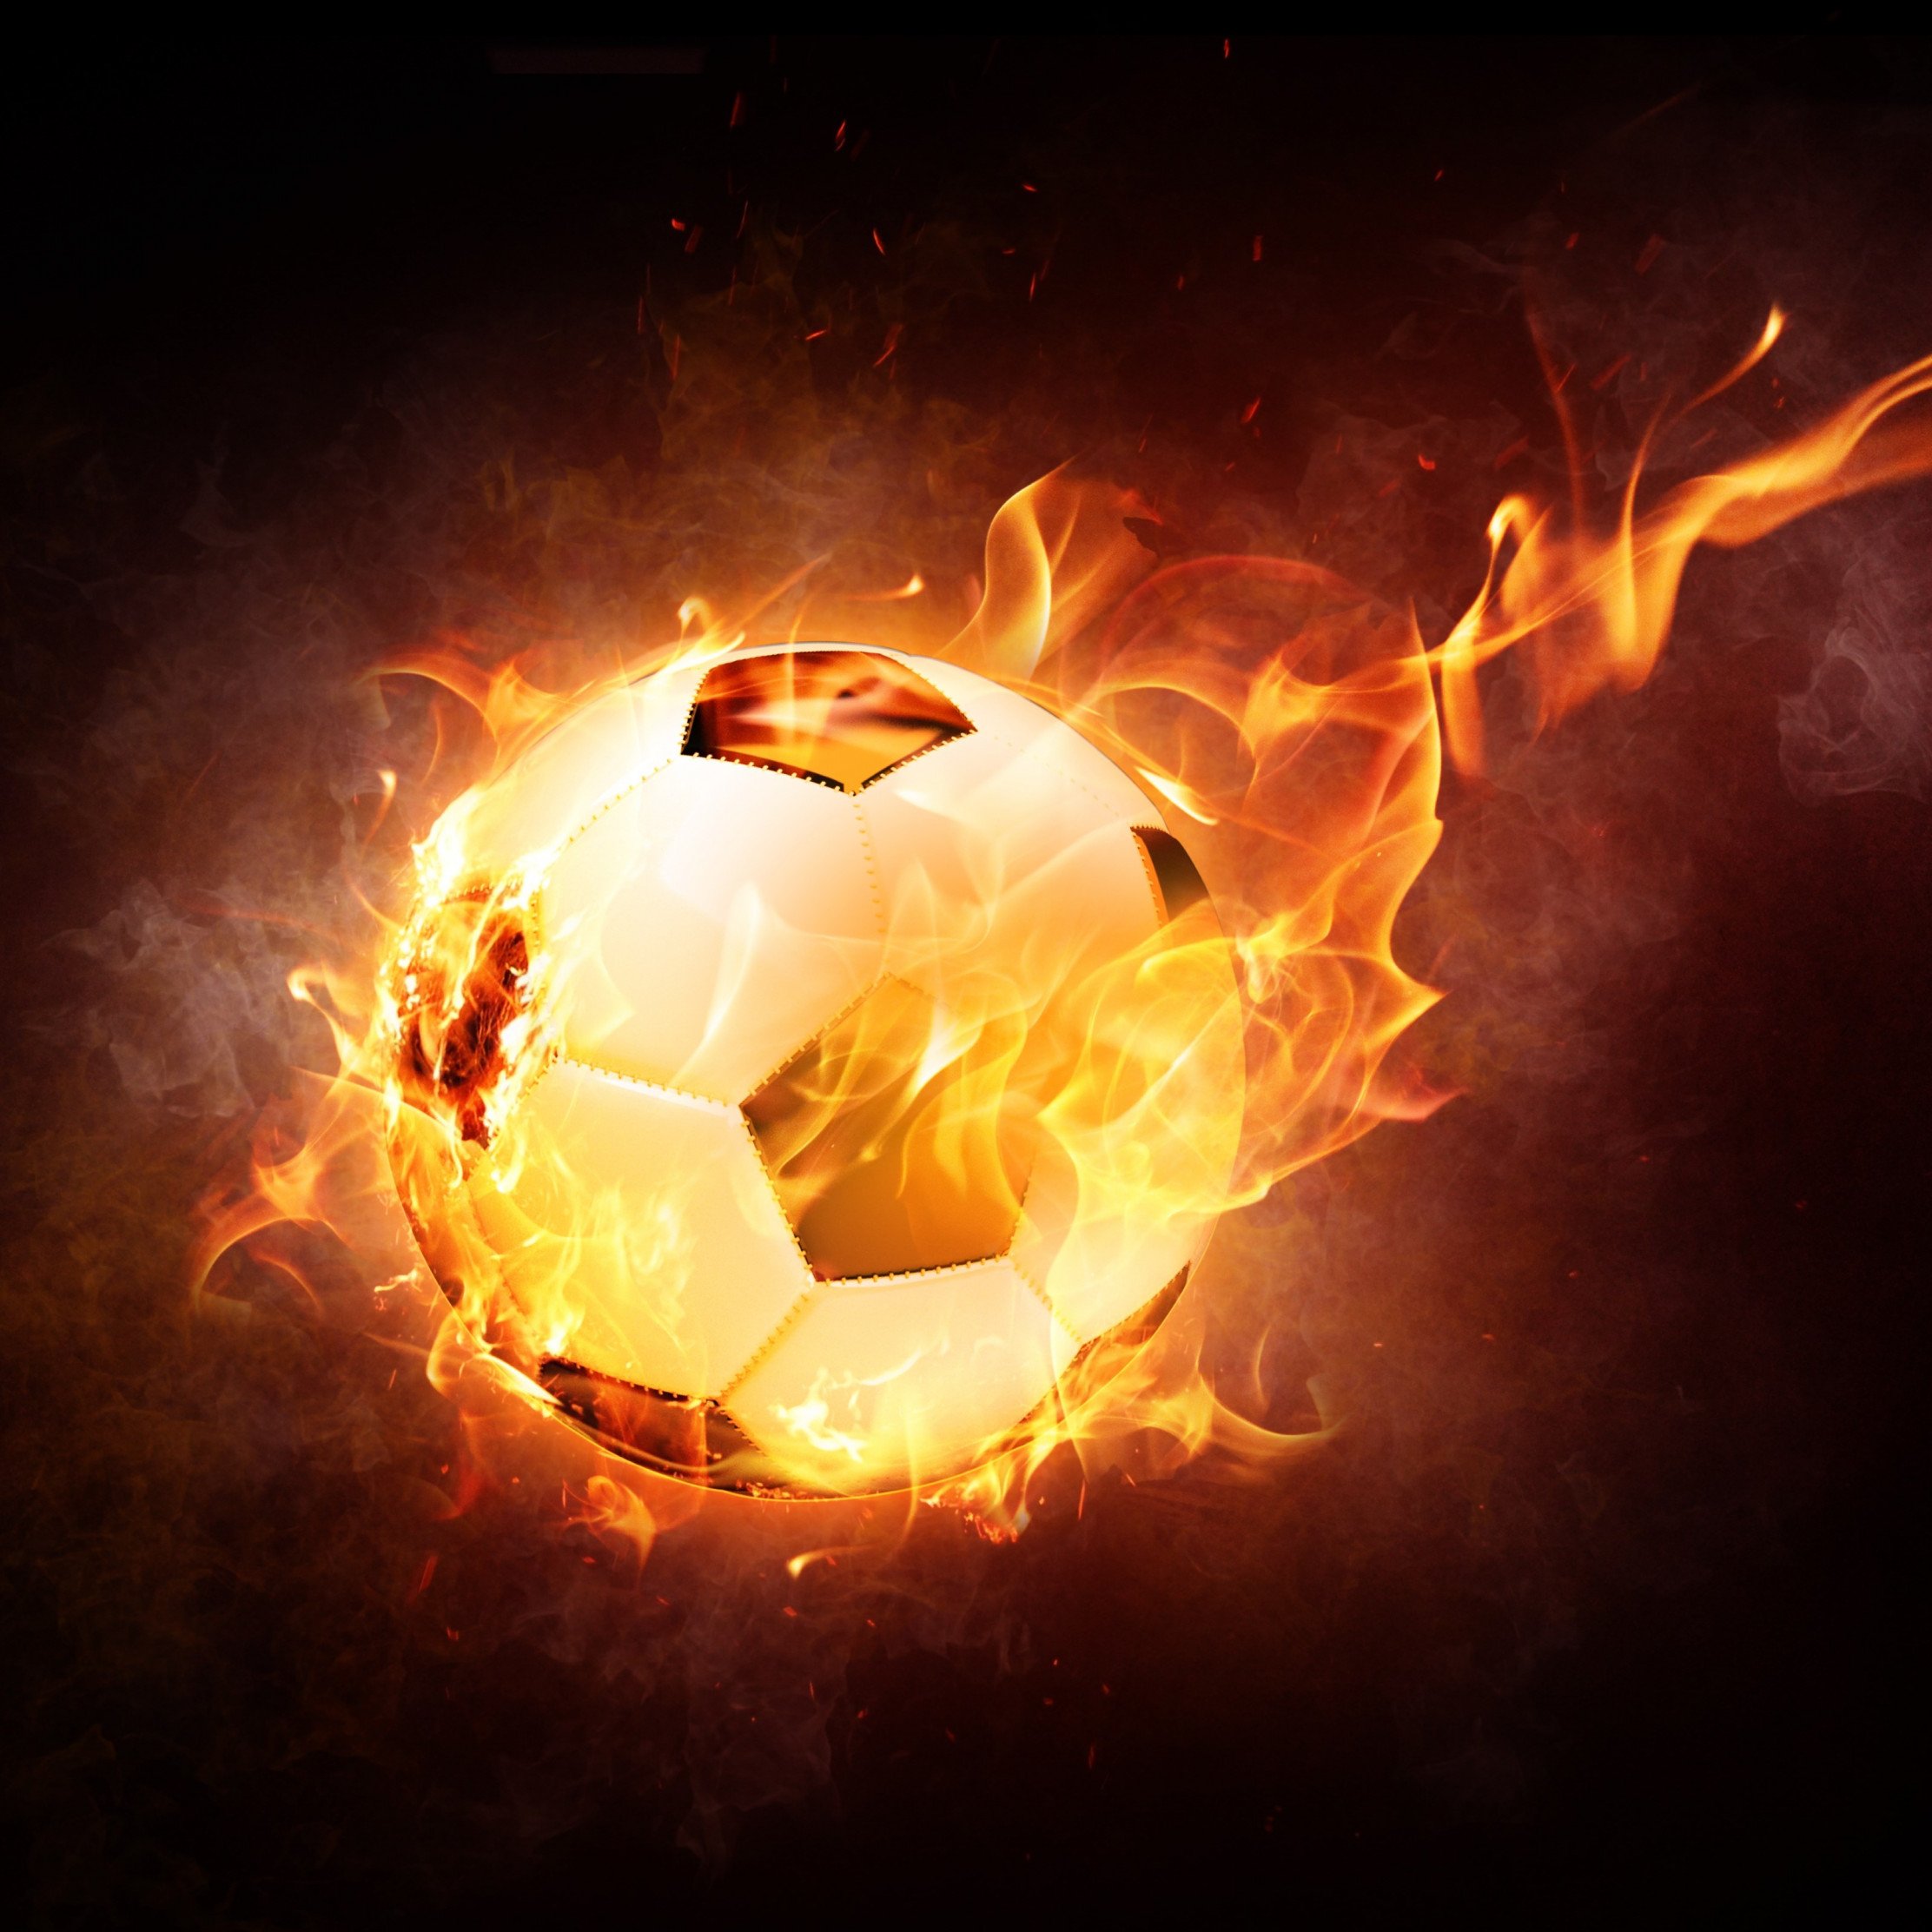 Download wallpaper: The football ball is on fire 2224x2224